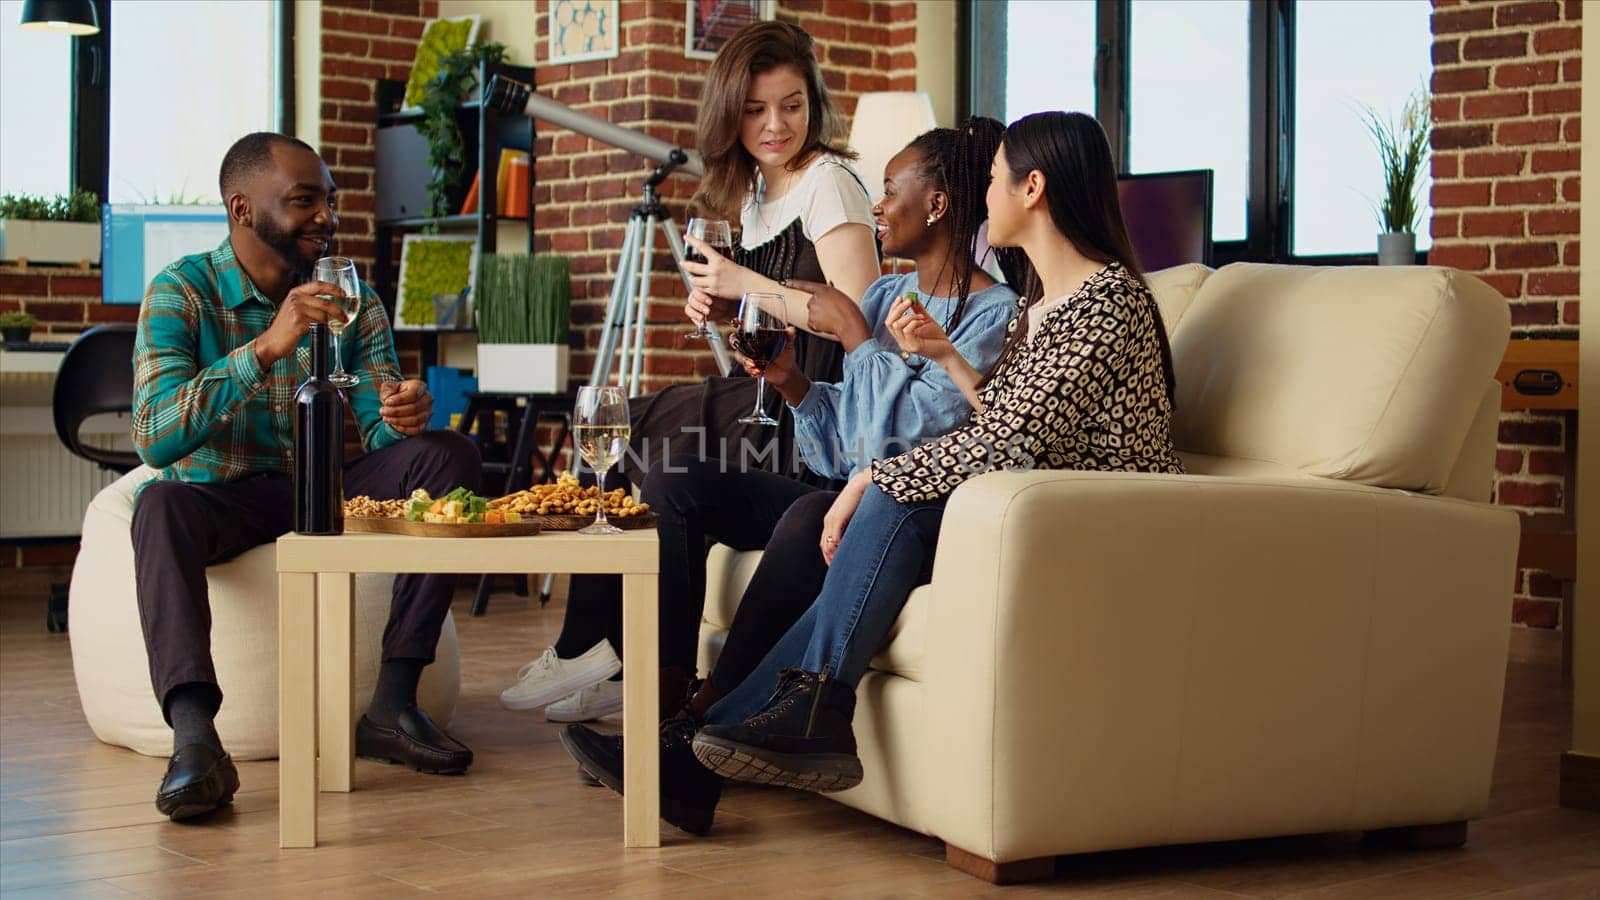 Culturally diverse group of people talking, drinking wine at friends social reunion. African american woman enjoying talking with mates, having fun together, eating snacks